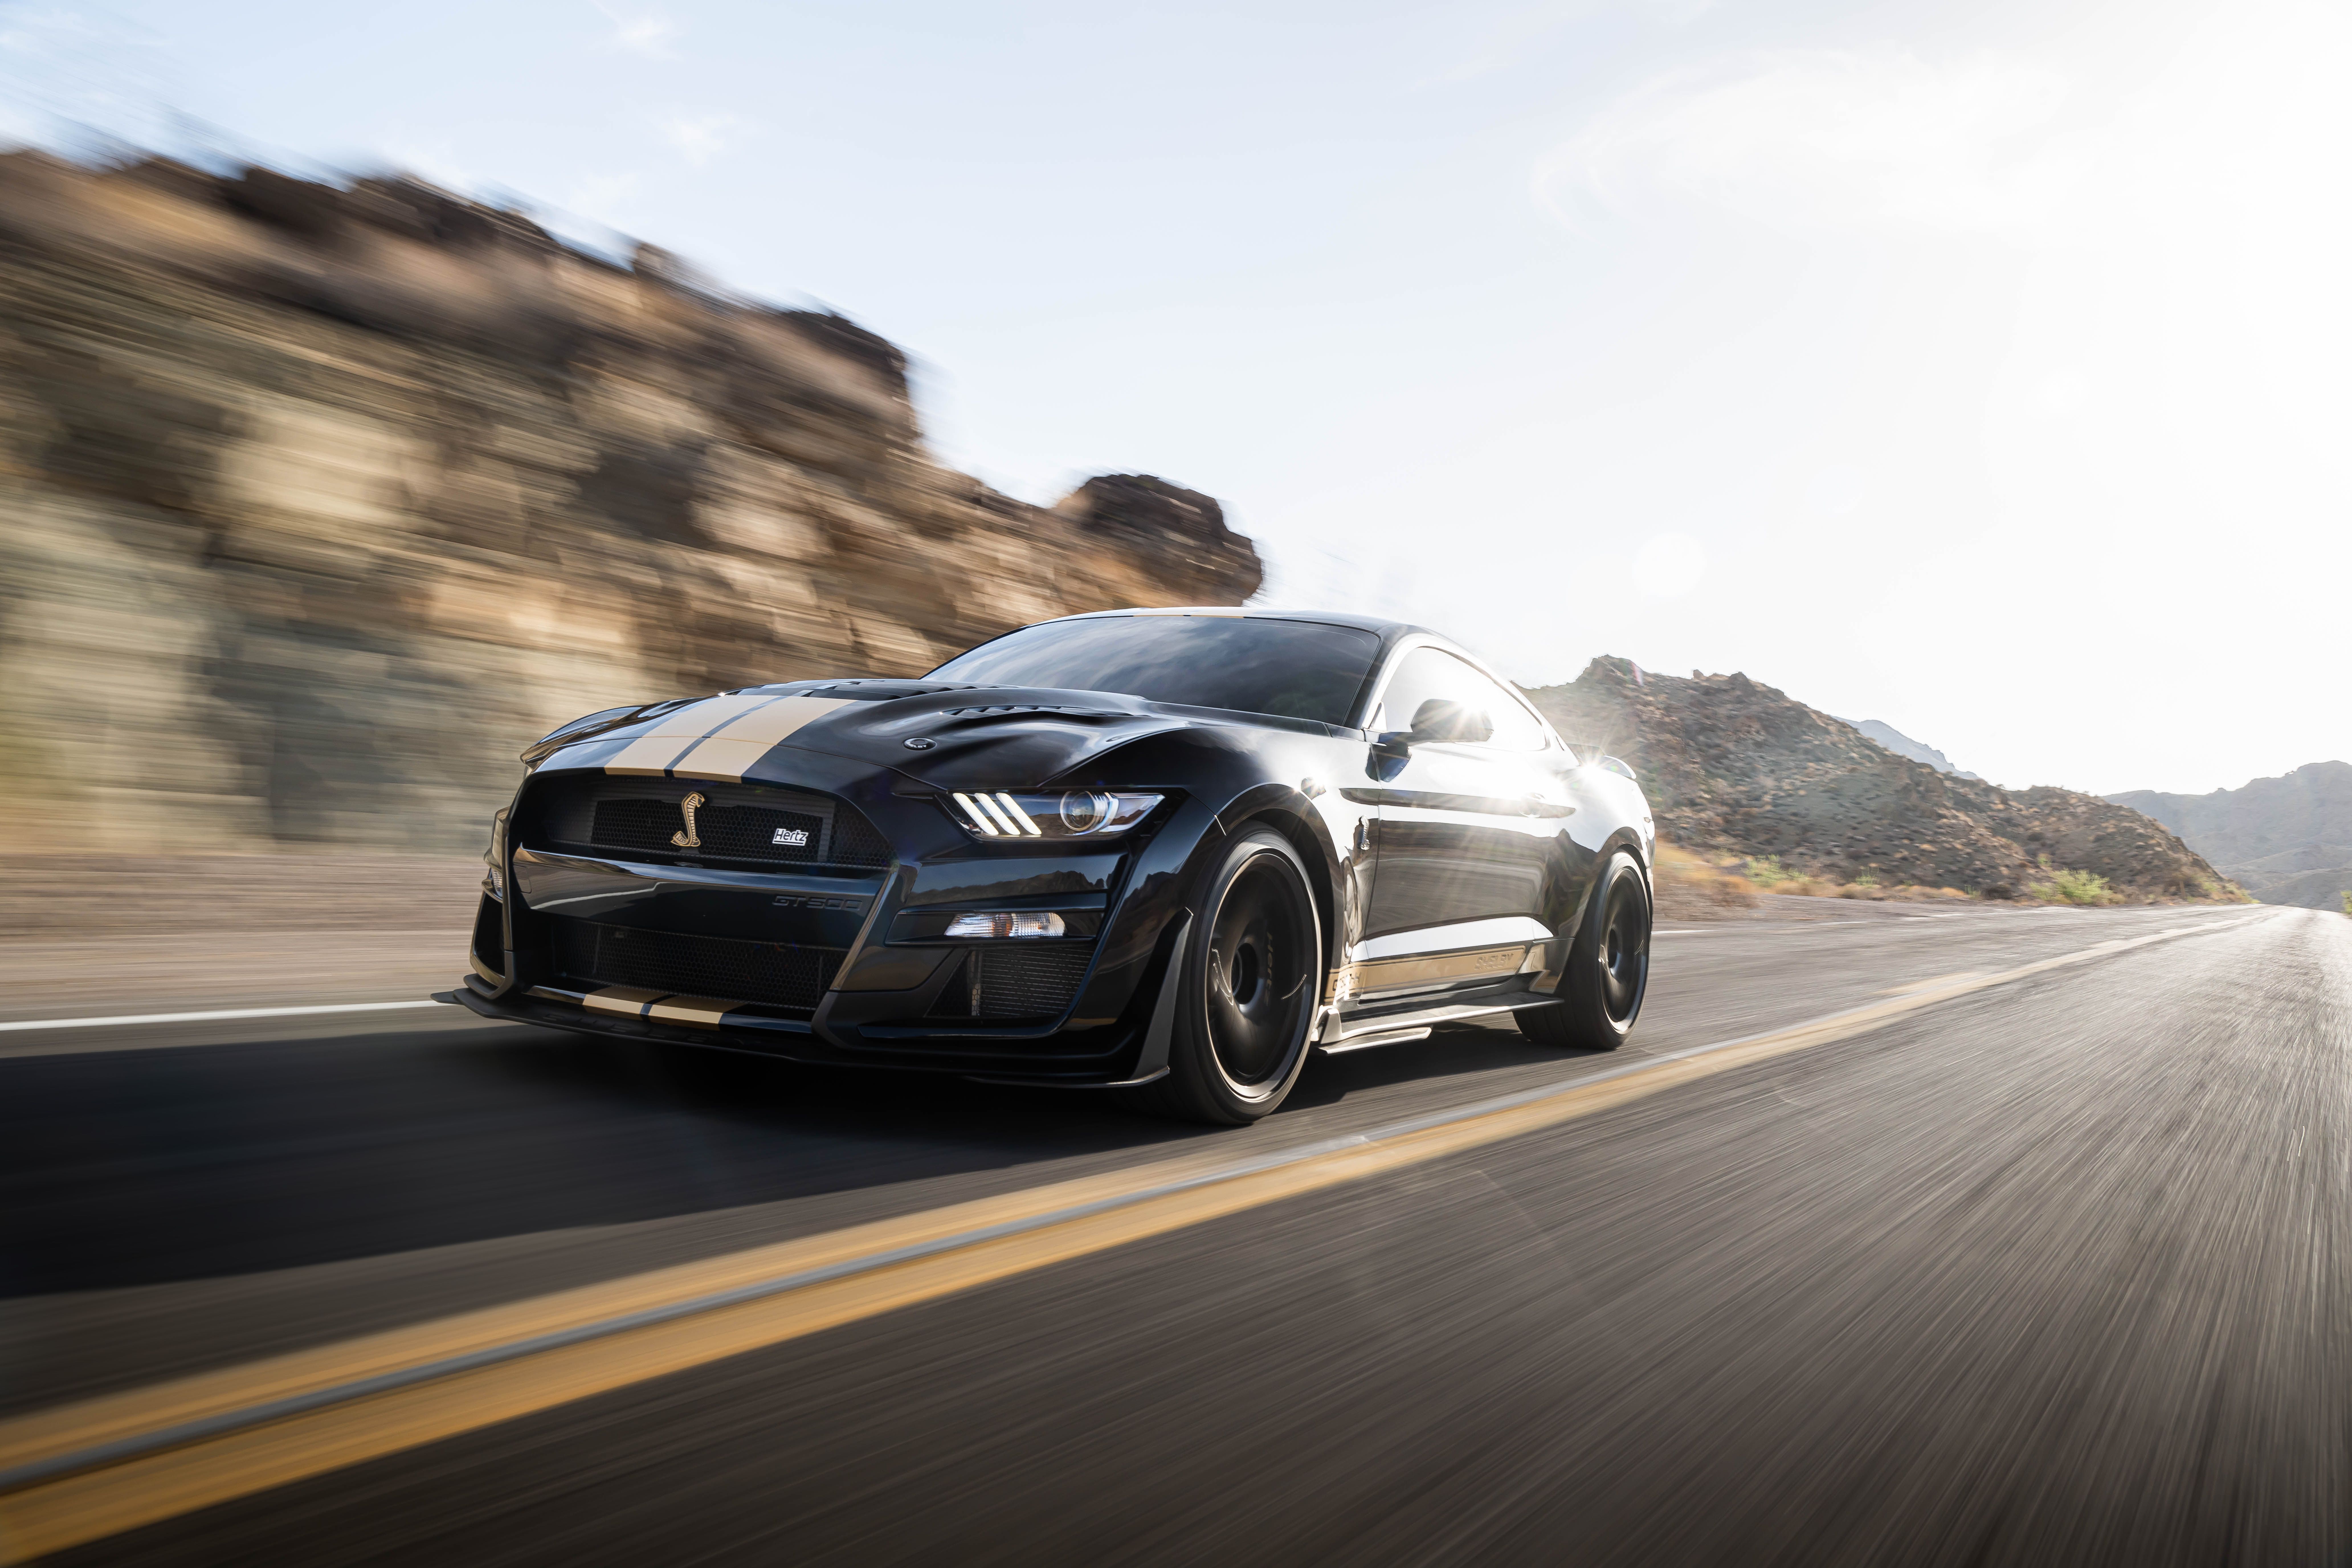 Wallpaper ID 444872  Vehicles Ford Mustang Shelby GT500 Phone Wallpaper   750x1334 free download